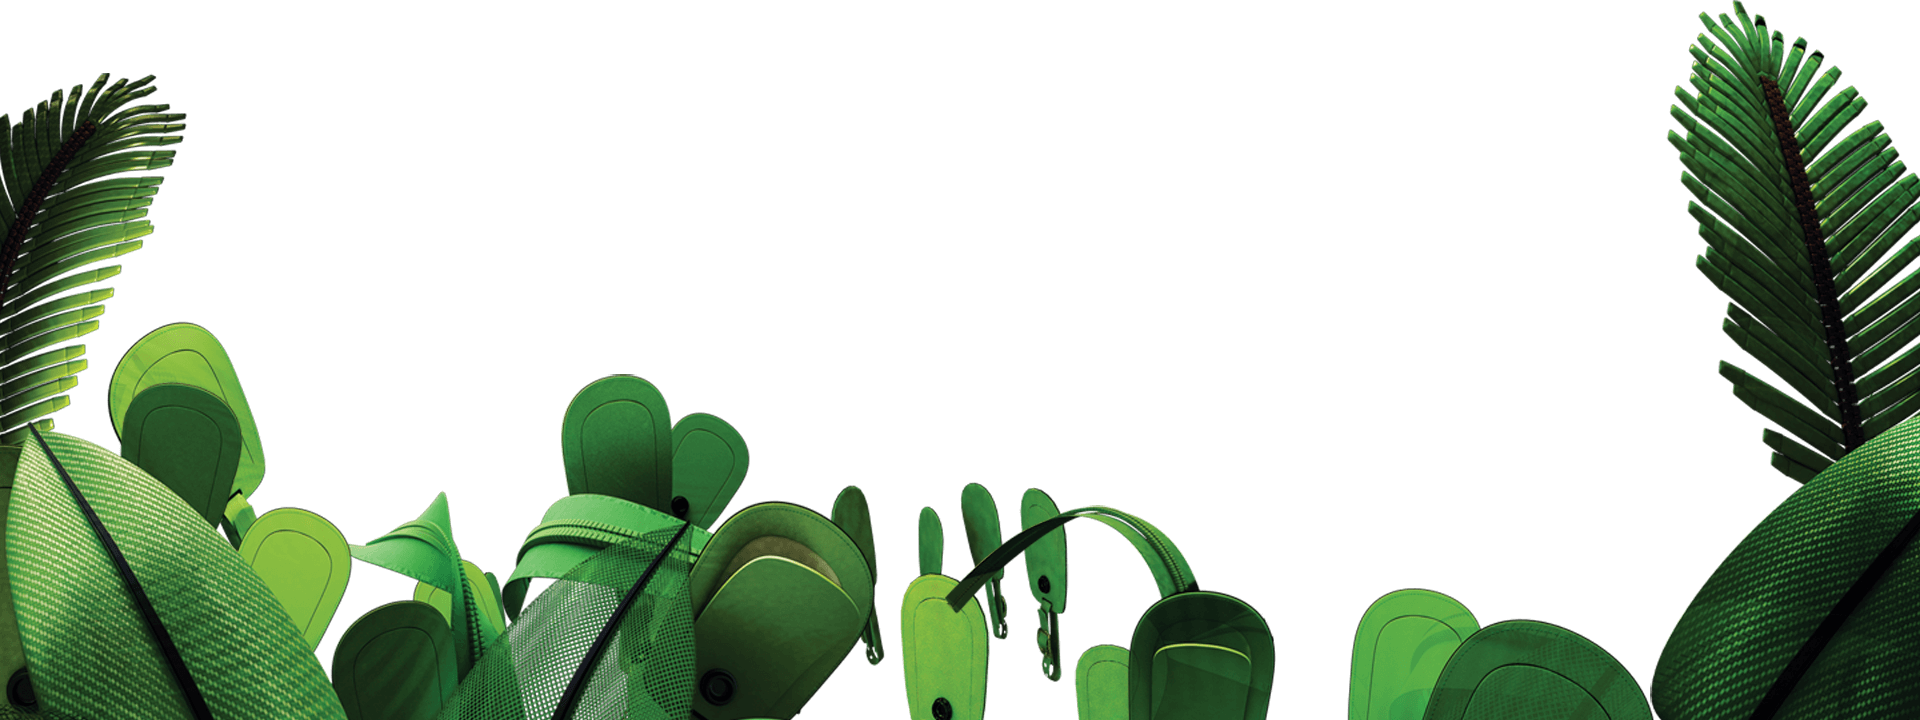 Download PNG image - Jungle PNG Picture 